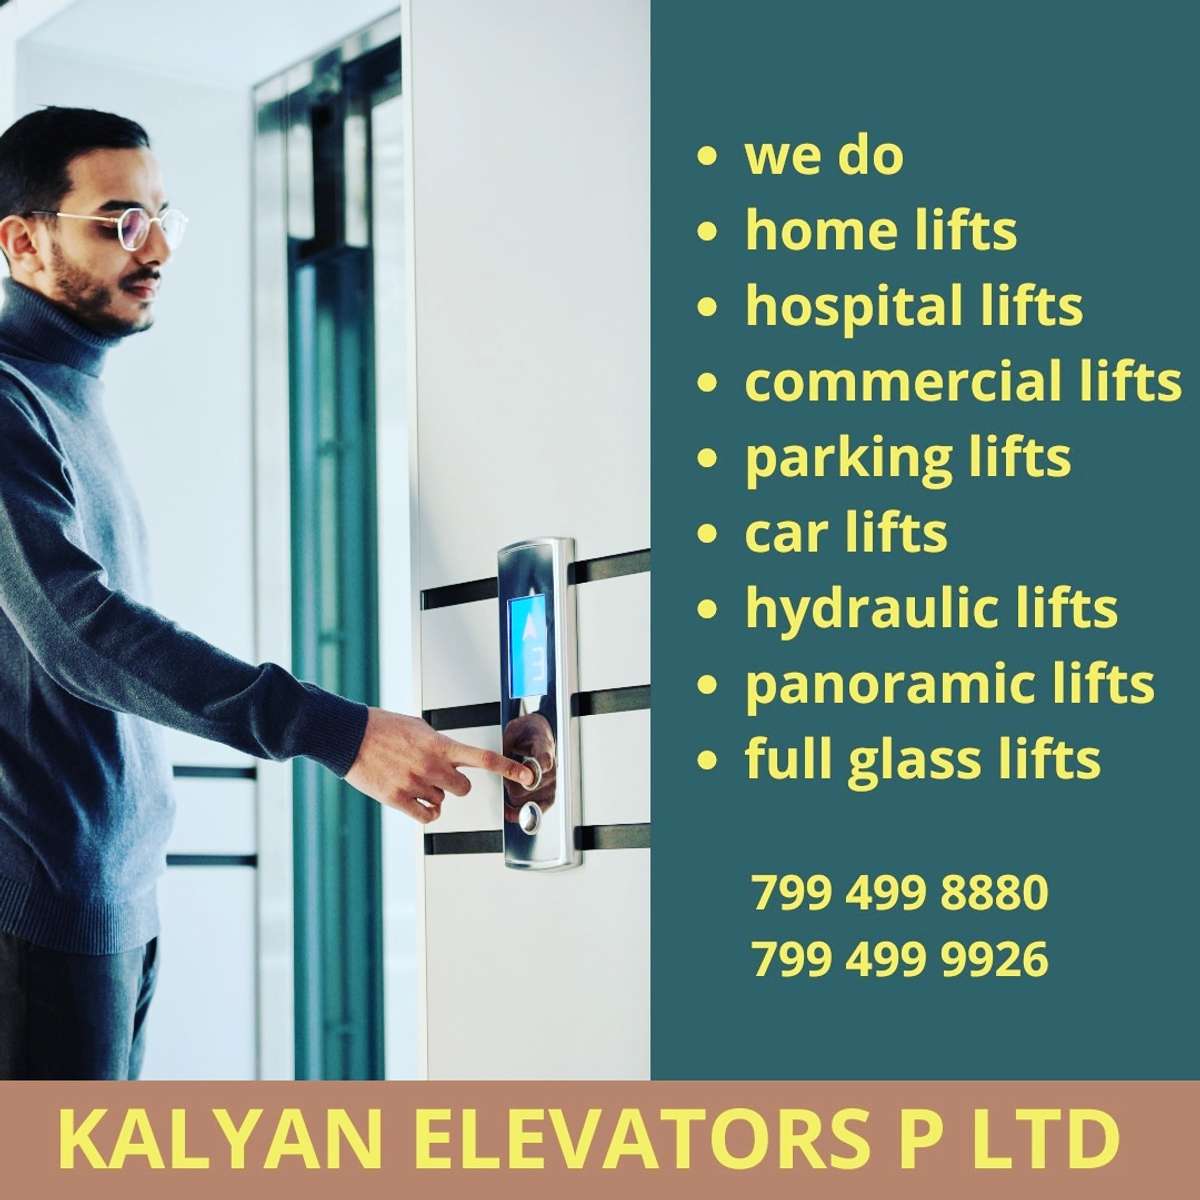 related lift enquiry please contact